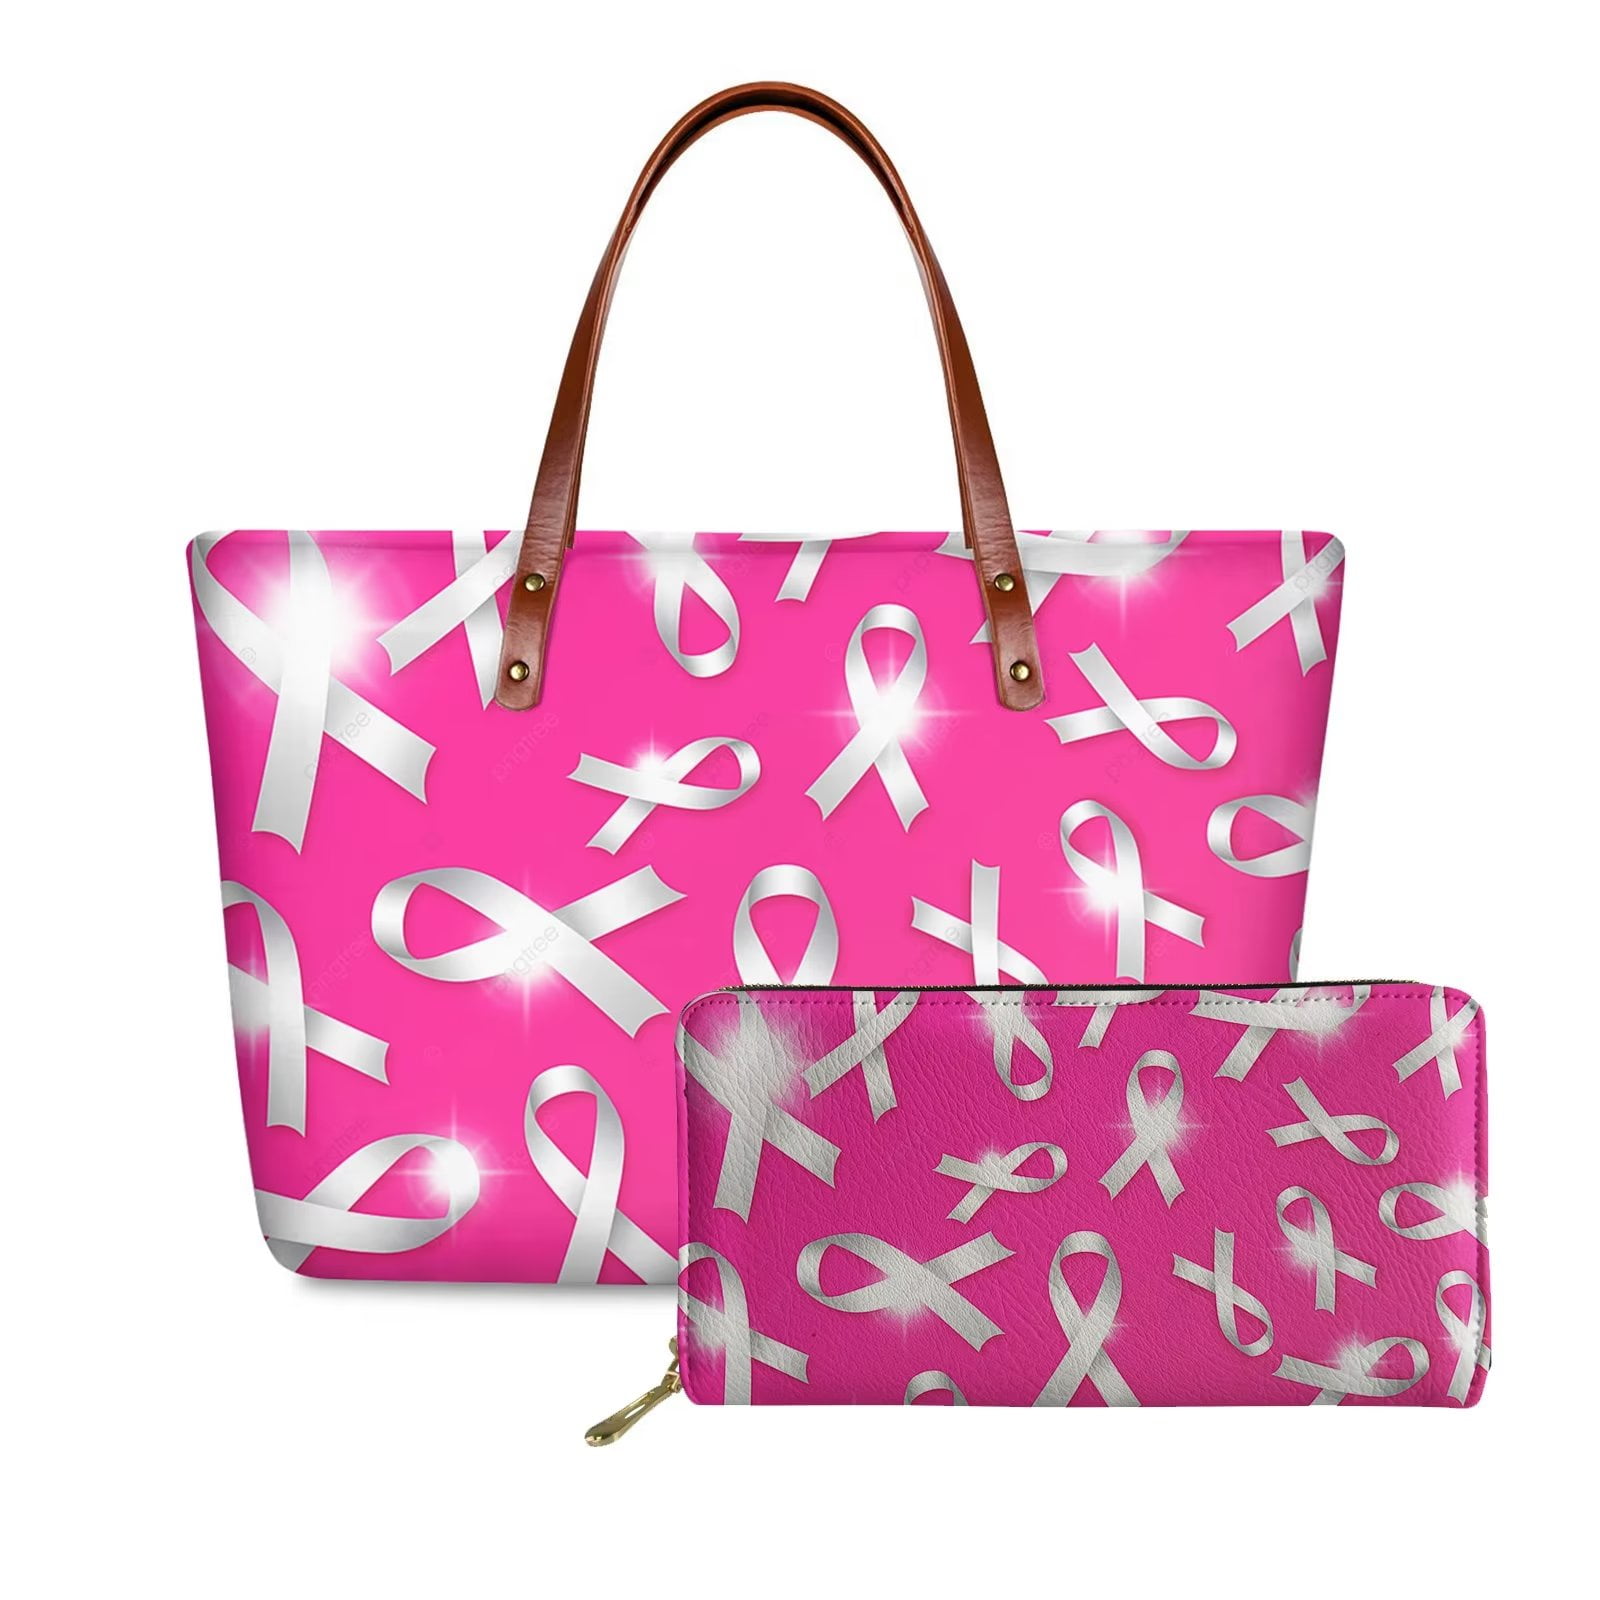 Purse - Pink Kylie Woven Cross Body Bag - Breast Cancer Awareness Month -  Columbia Laser and Aesthetics Center